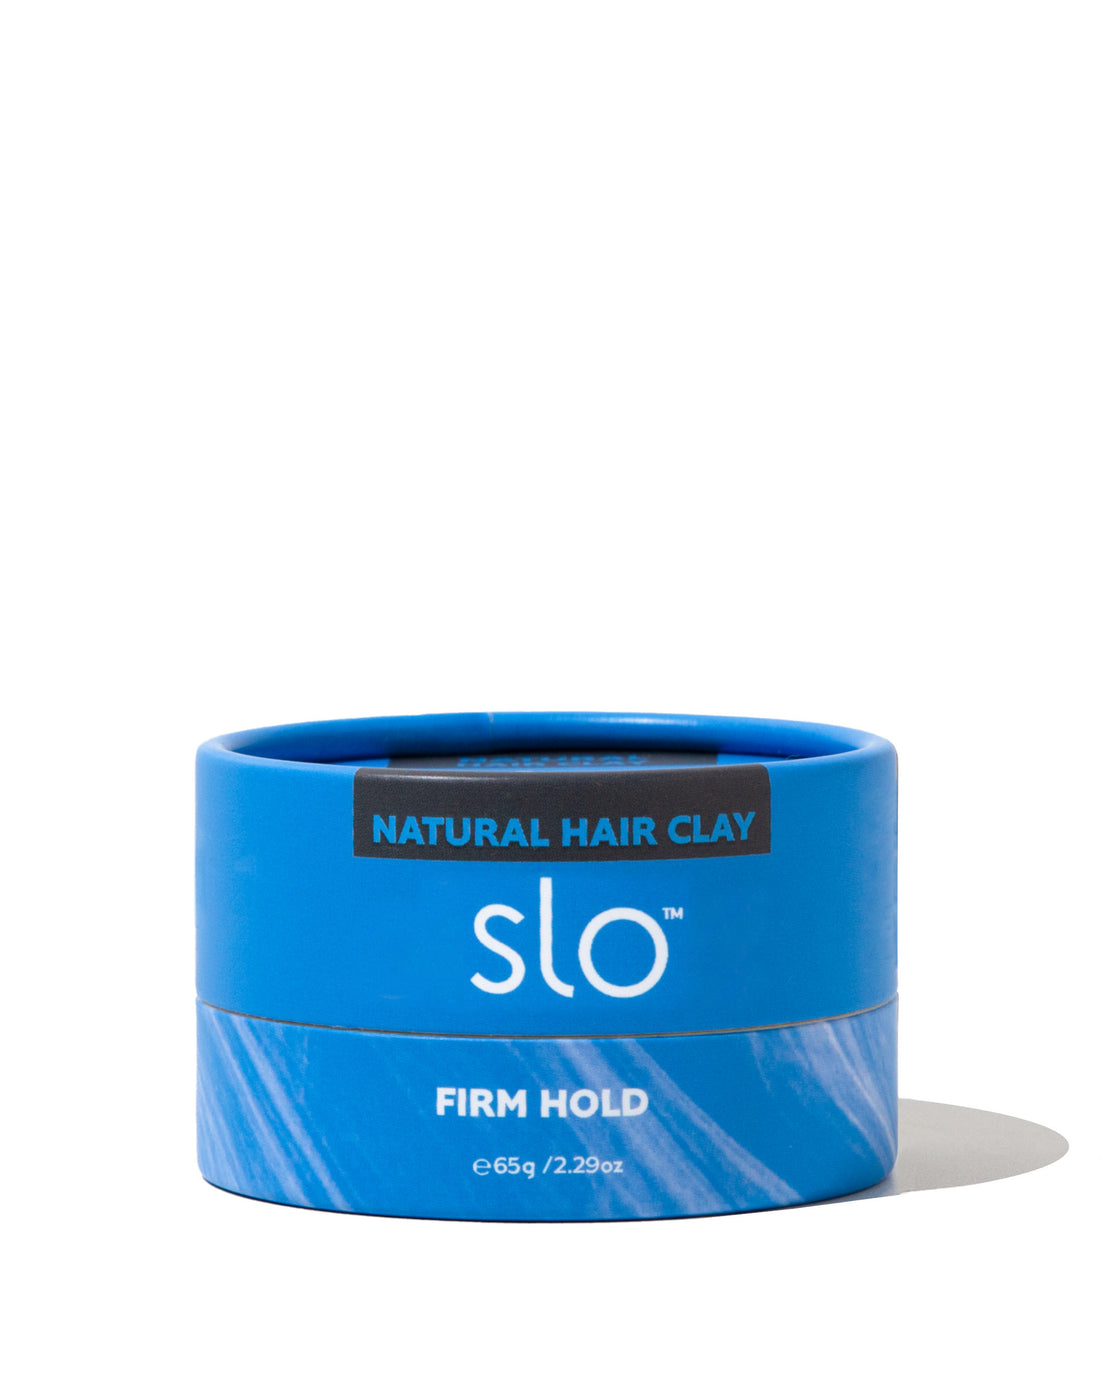 Natural Hair Clay - Firm Hold